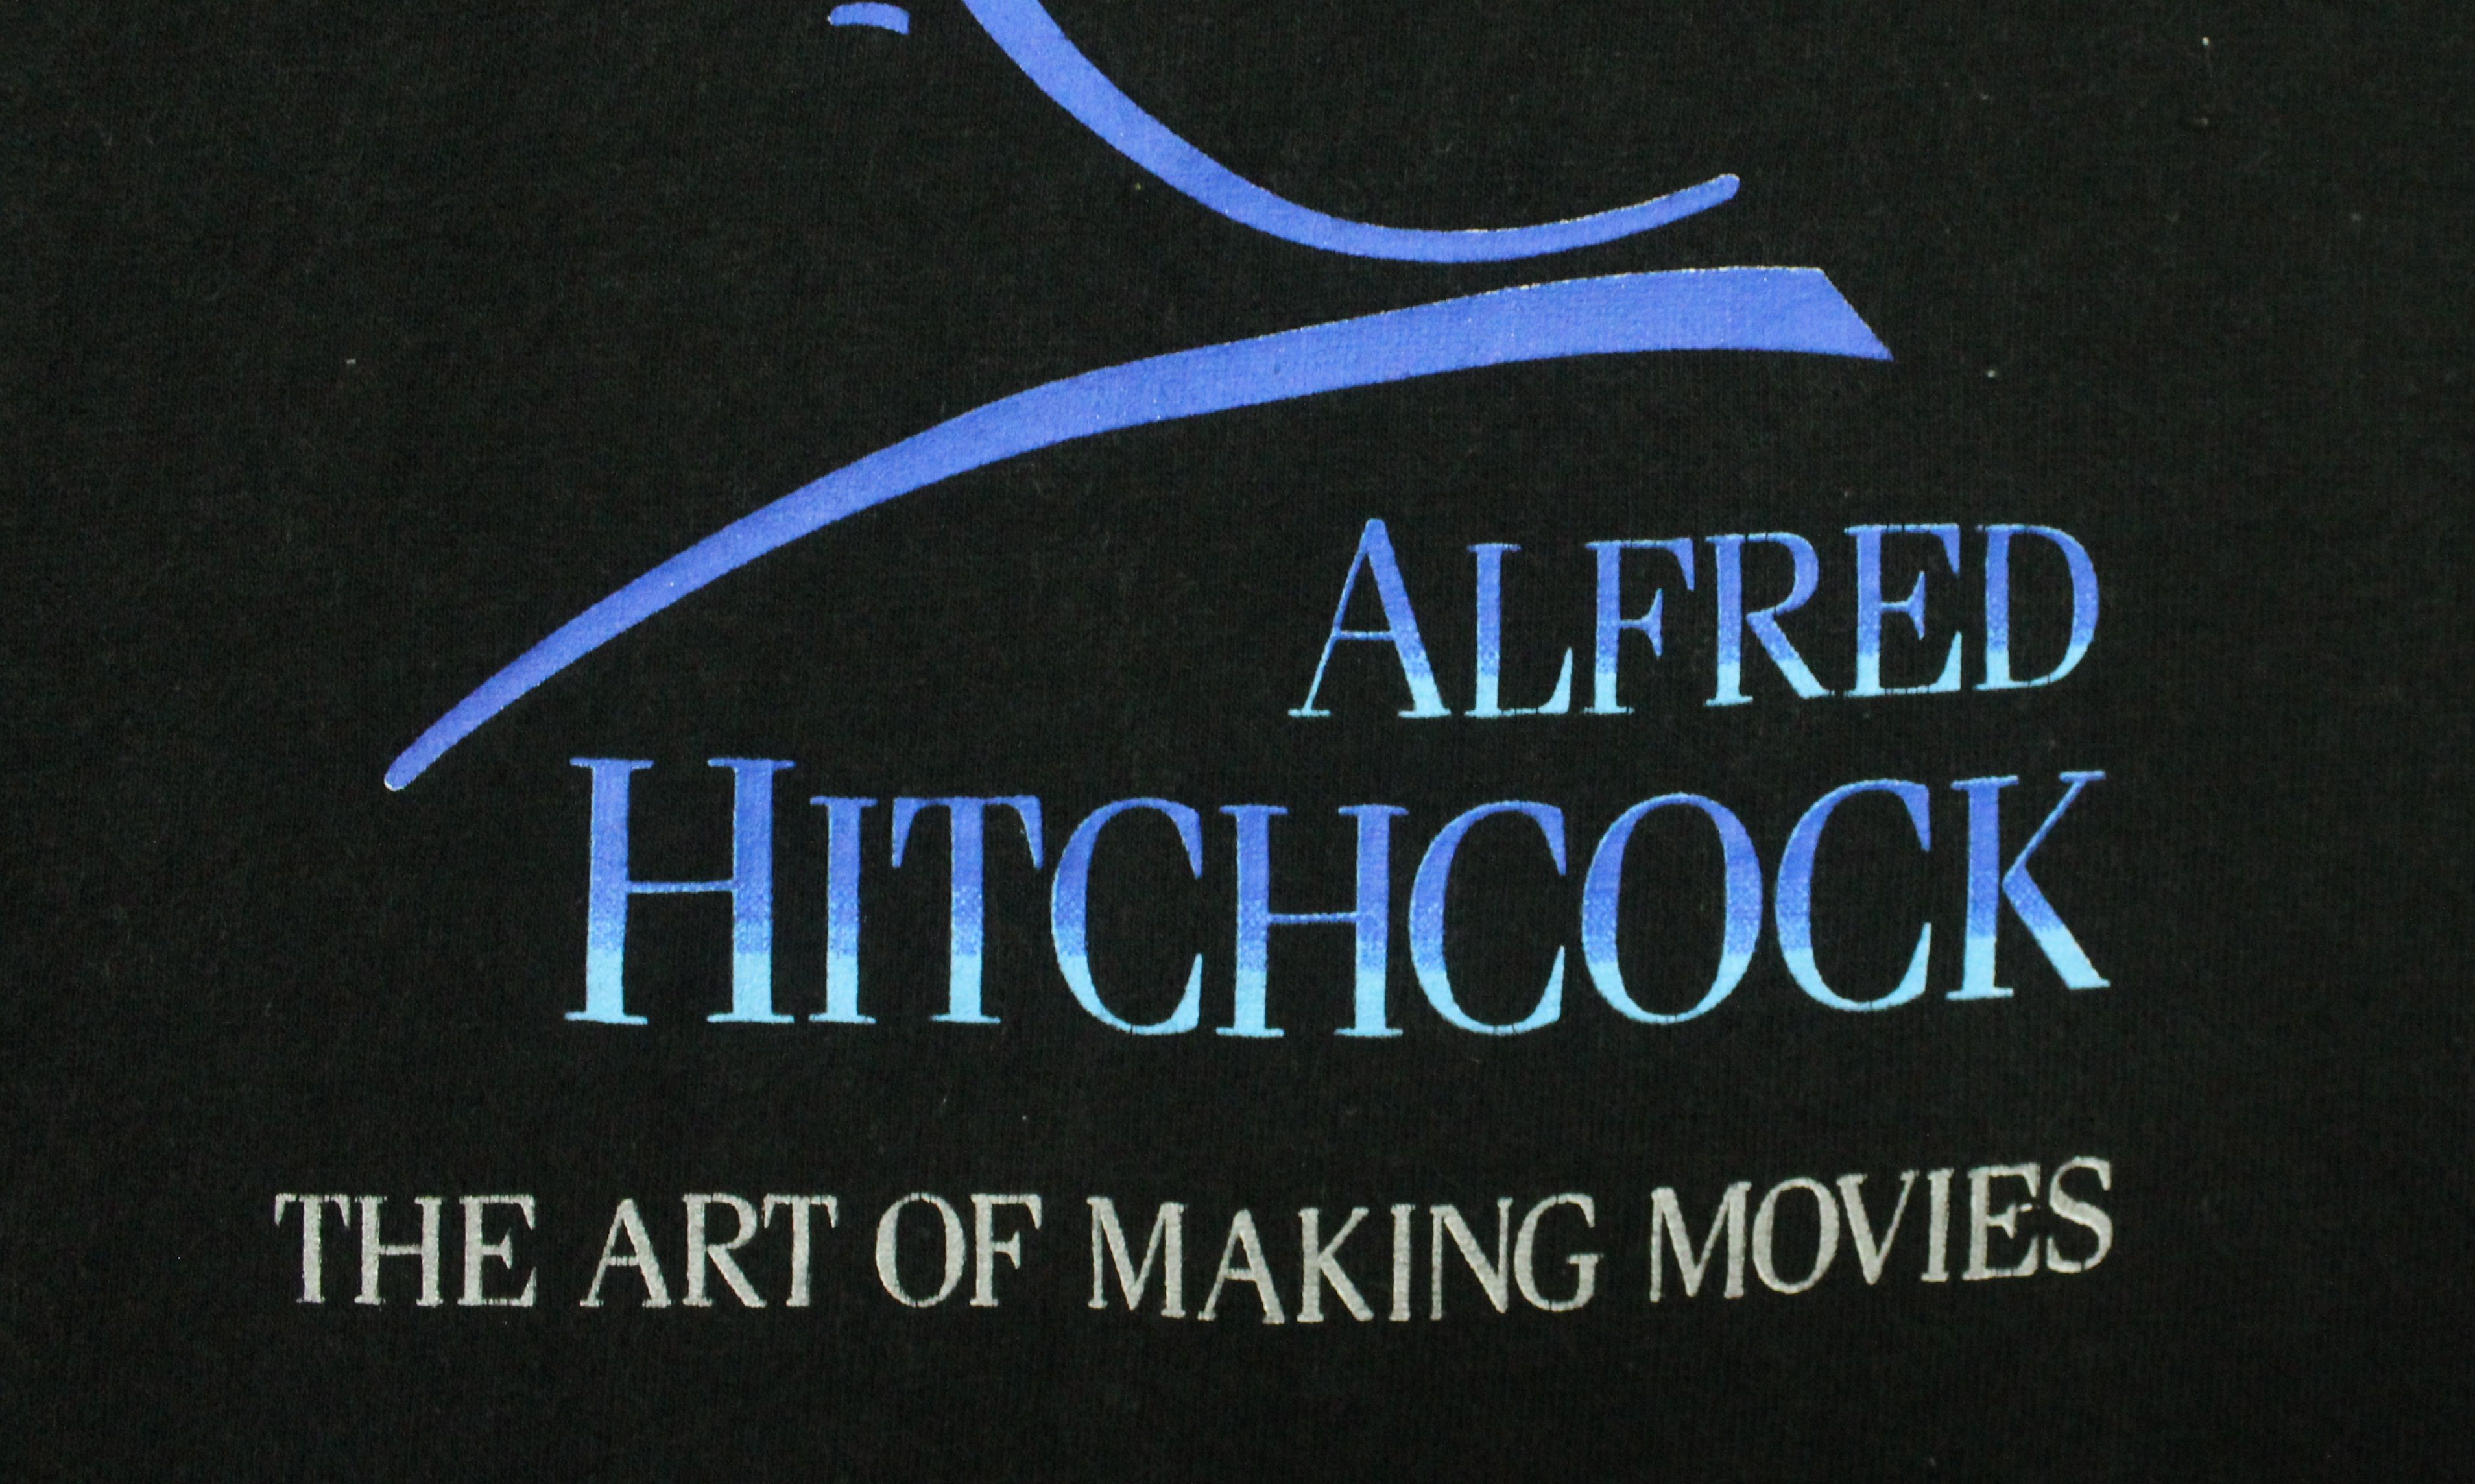 Vintage Vintage 90s ALFRED HITCHCOCK T Shirt The Art of Making Movie Size US XL / EU 56 / 4 - 8 Thumbnail